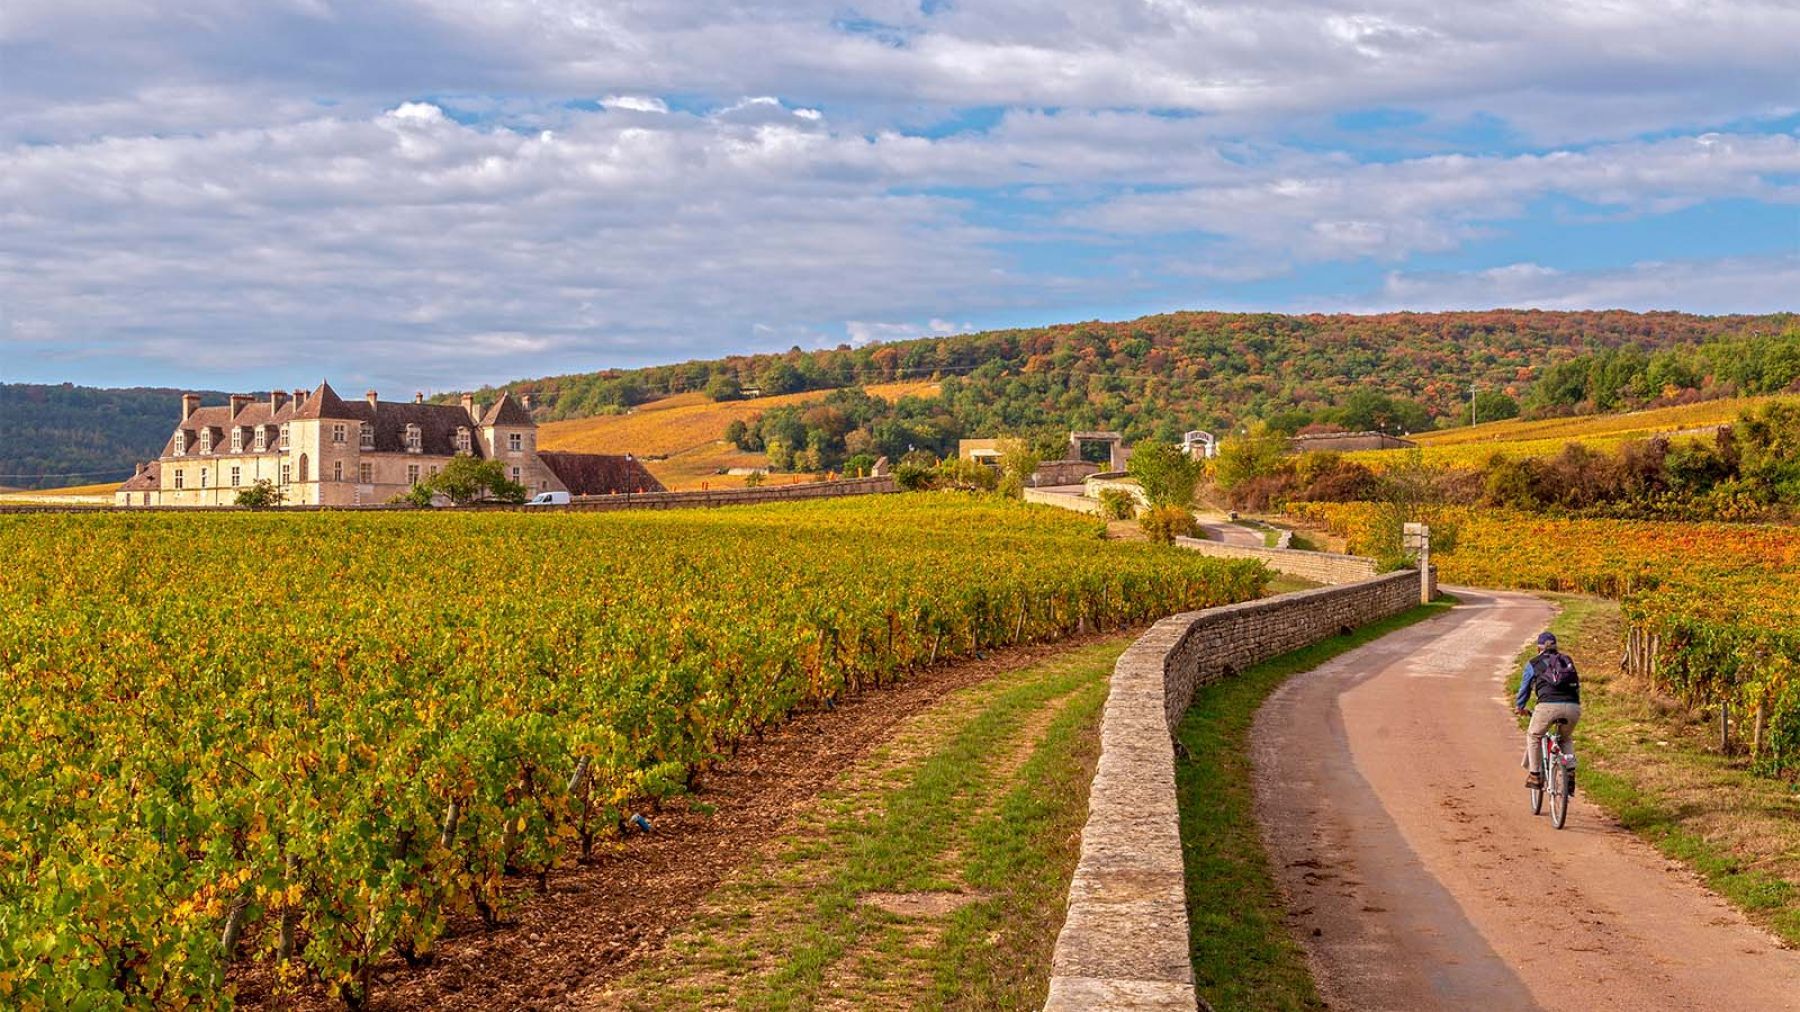 When is the best time to visit Burgundy?